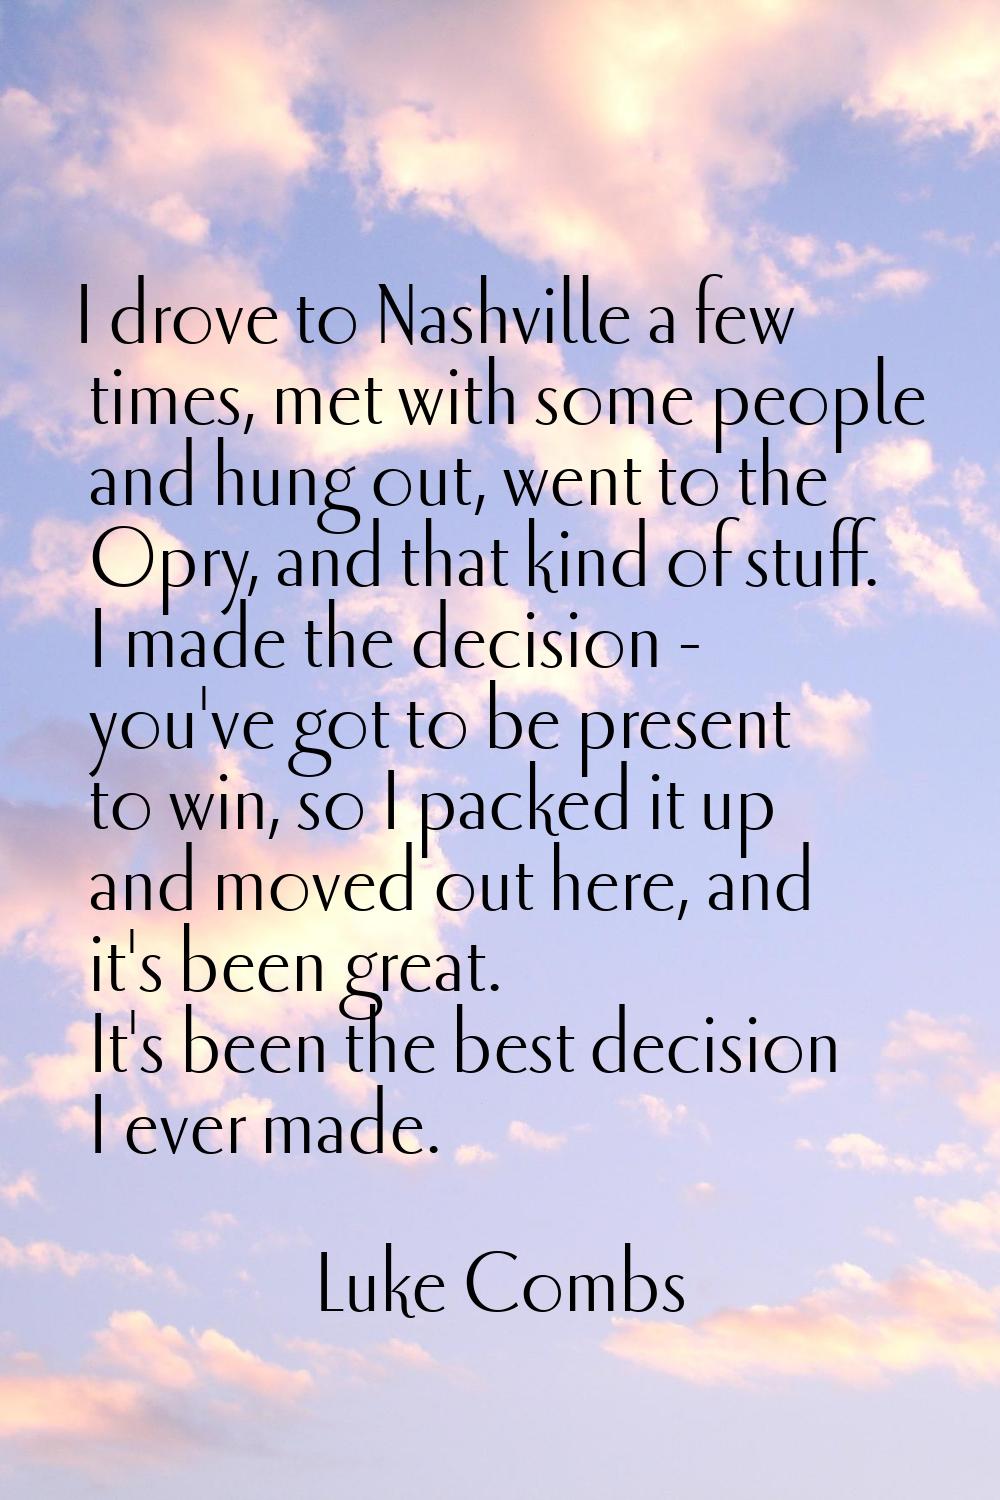 I drove to Nashville a few times, met with some people and hung out, went to the Opry, and that kin